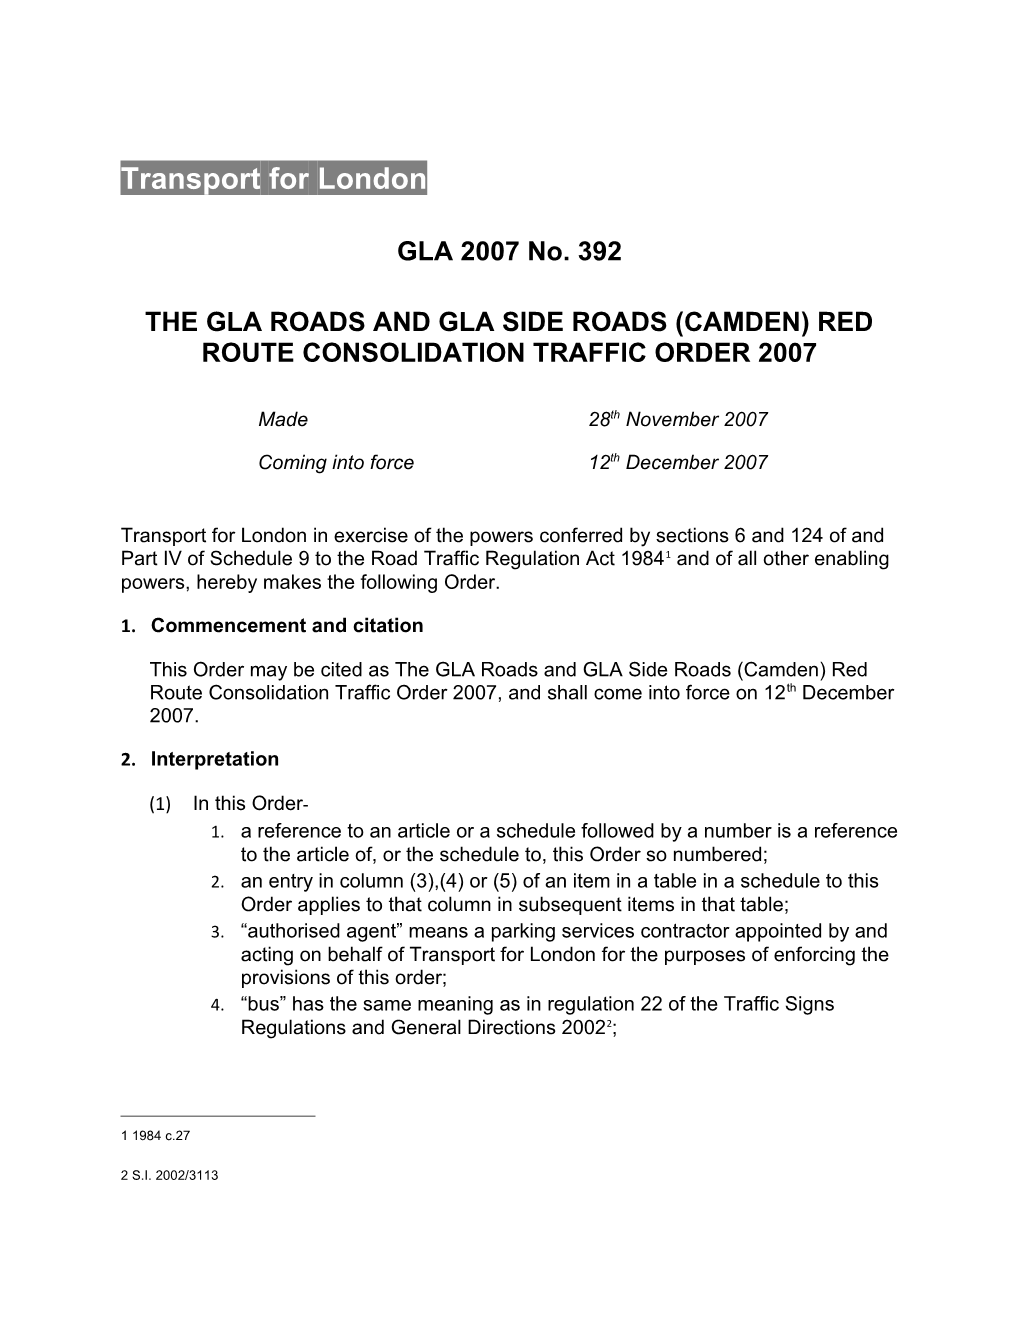 The Gla Roads and Gla Side Roads (Camden) Red Route Consolidation Traffic Order 2007